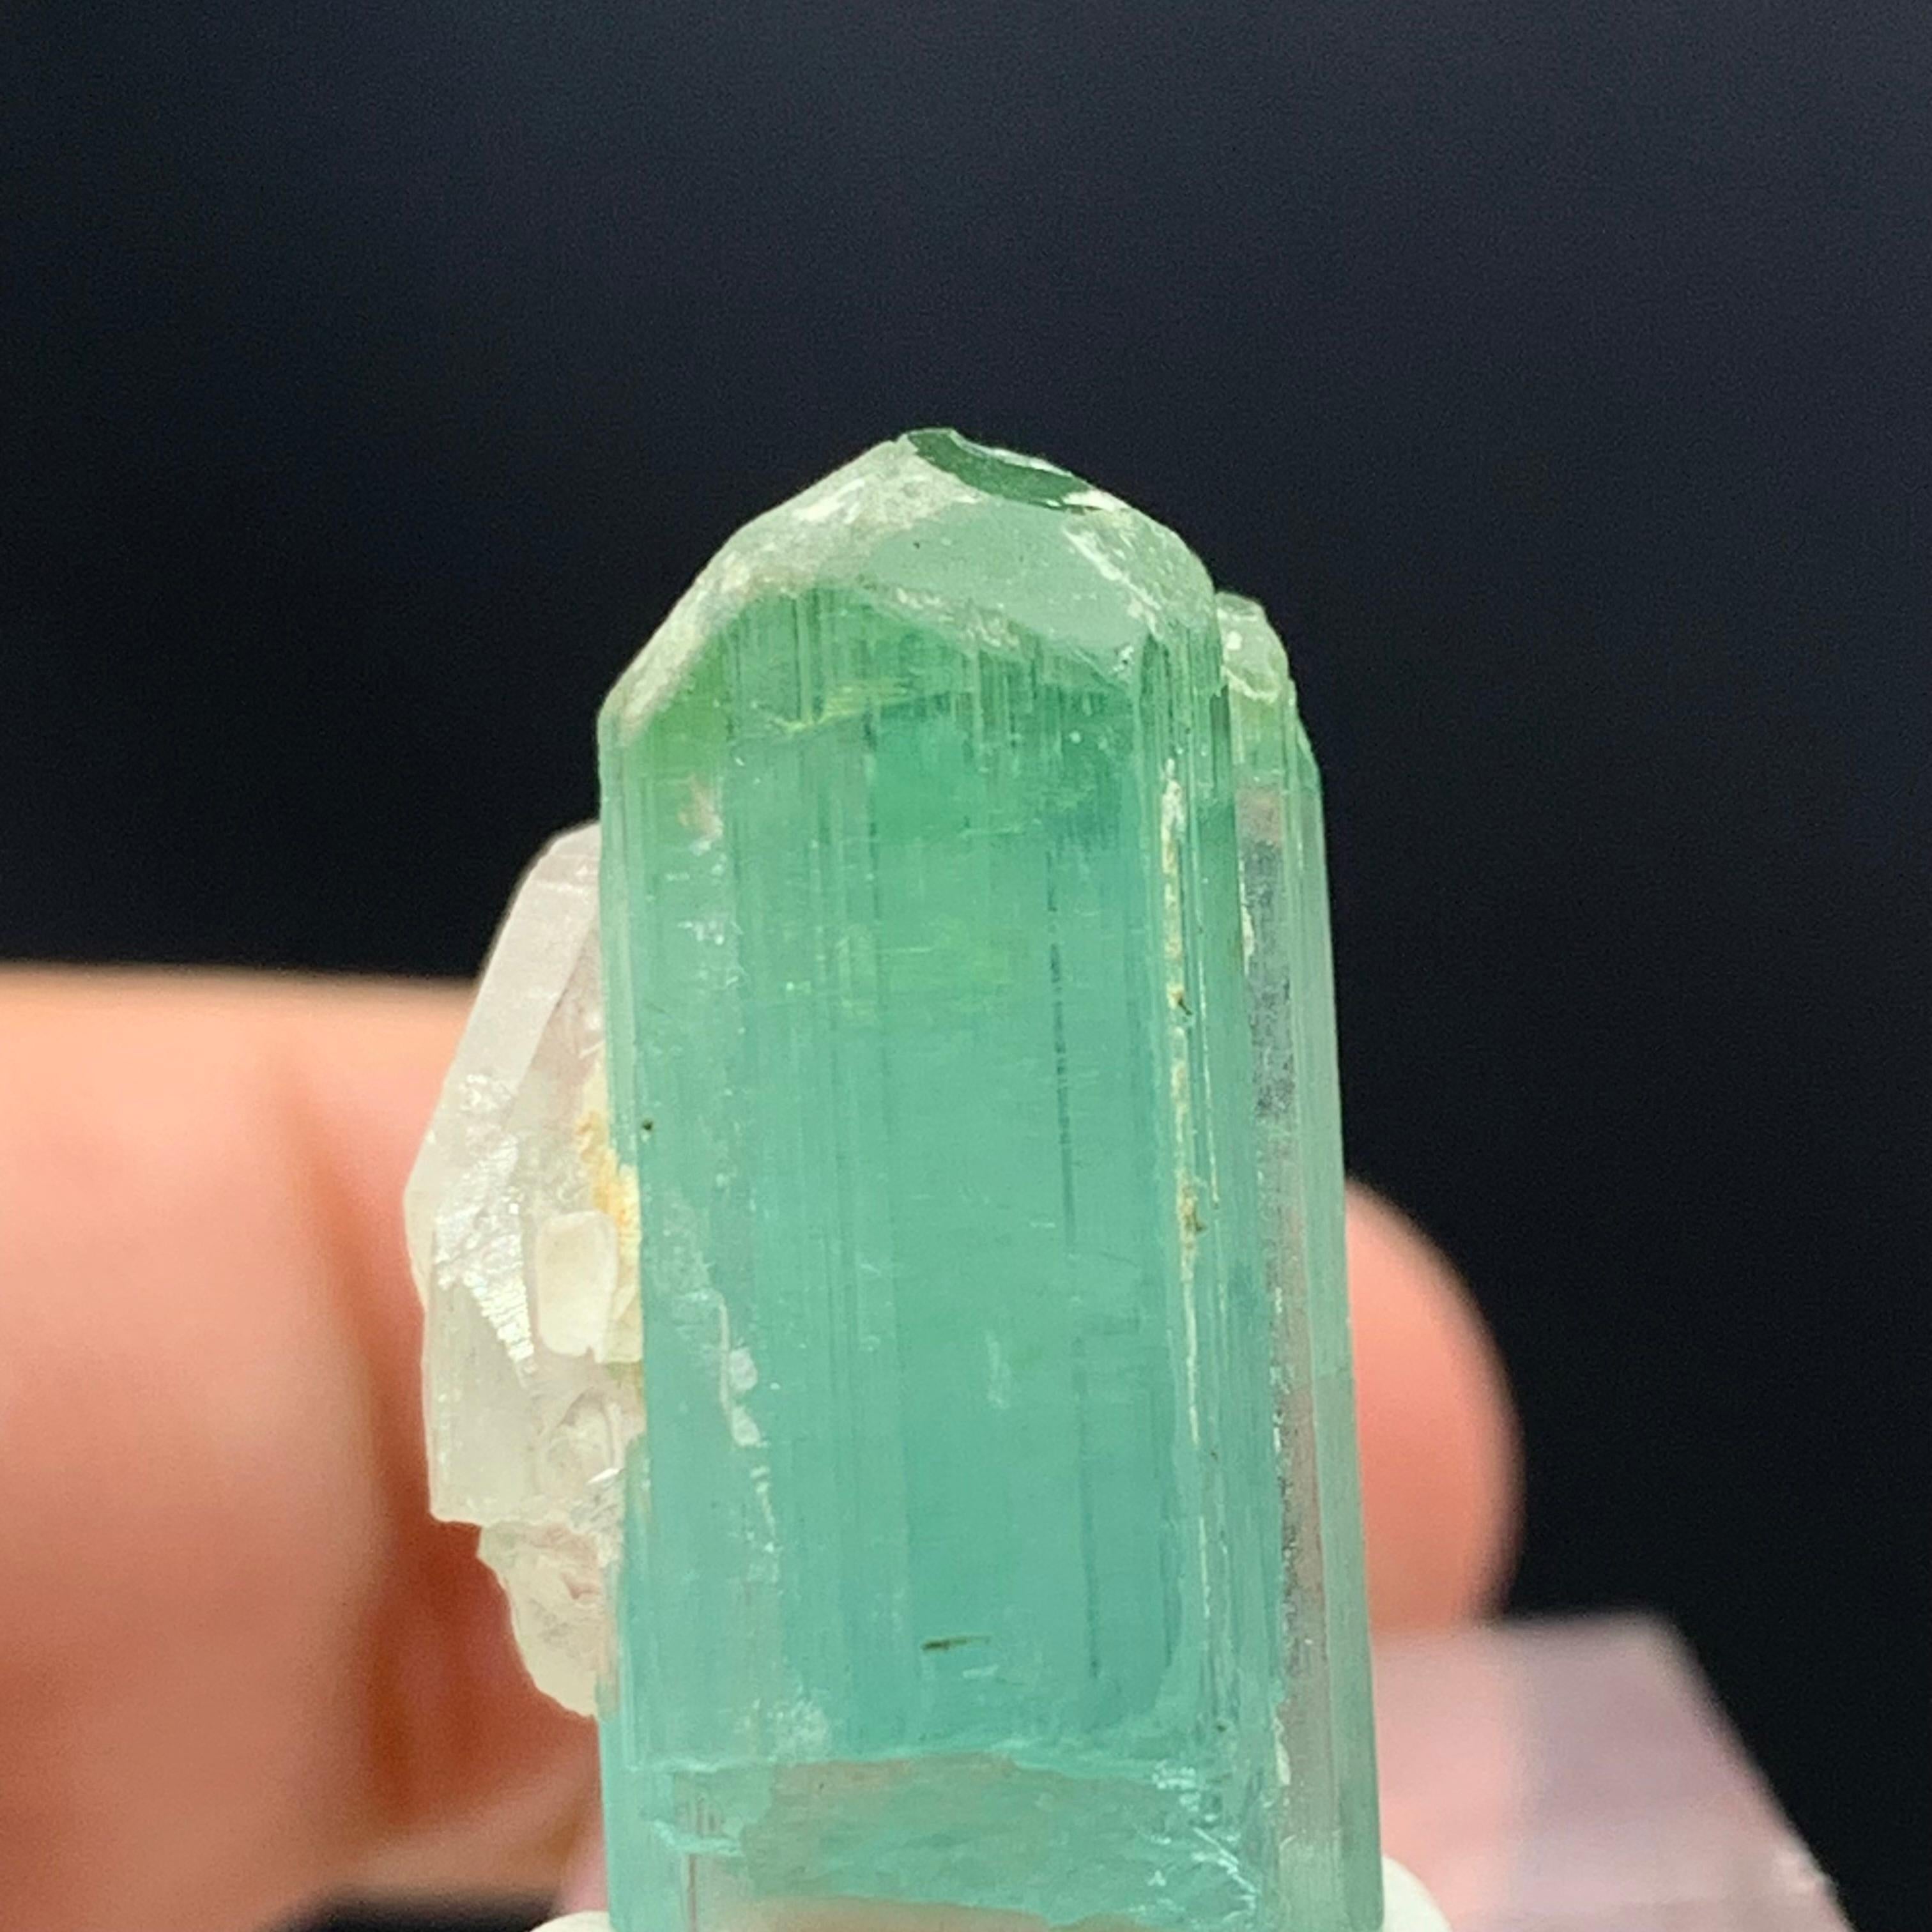 20.95 Carat Adorable Seafoam Tourmaline Specimen From Kunar, Afghanistan
Weight: 20.95 Carat 
Dimension: 2 x 1.2 x 1.2 Cm
Origin: kunar, Afghanistan 

Seafoam Tourmaline is a member of the tourmaline family. The colors range from a soft green to